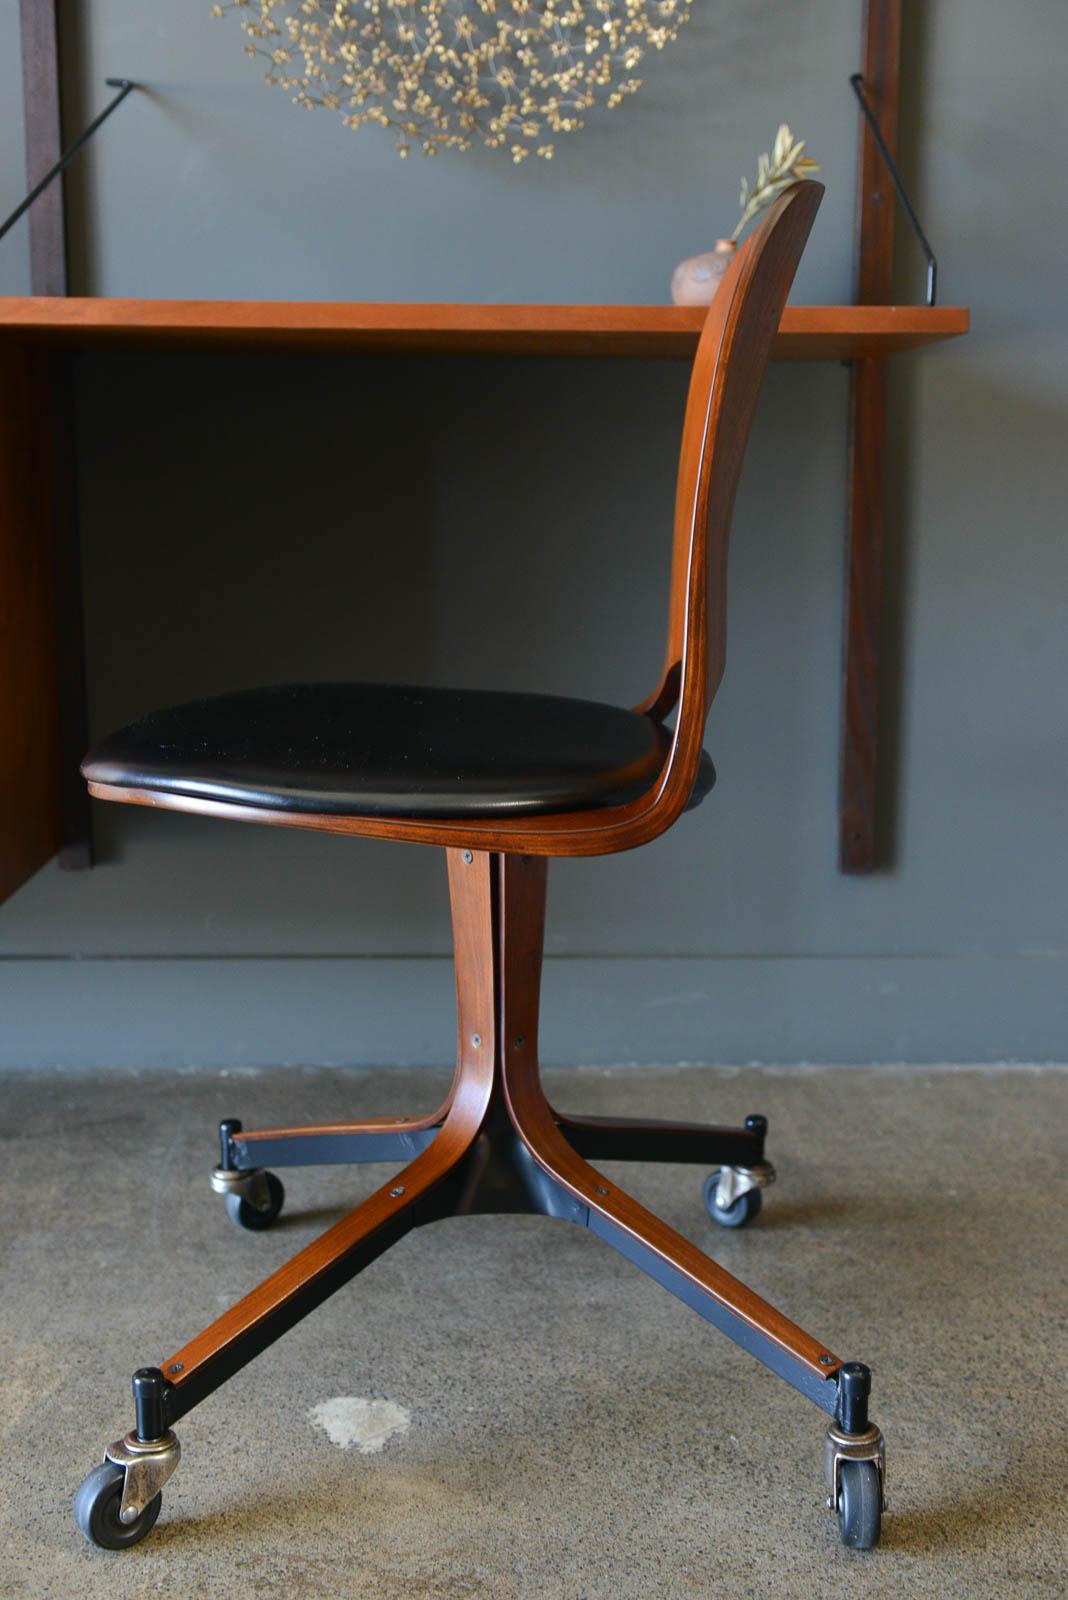 Swivel desk chair by George Mulhauser for Plycraft, 1965. Authentic bentwood swivel desk chair on original casters by George Multiuser for Plycraft, Inc. Original casters, black Naugahyde seat in good vintage condition. Wheels roll smooth and chair